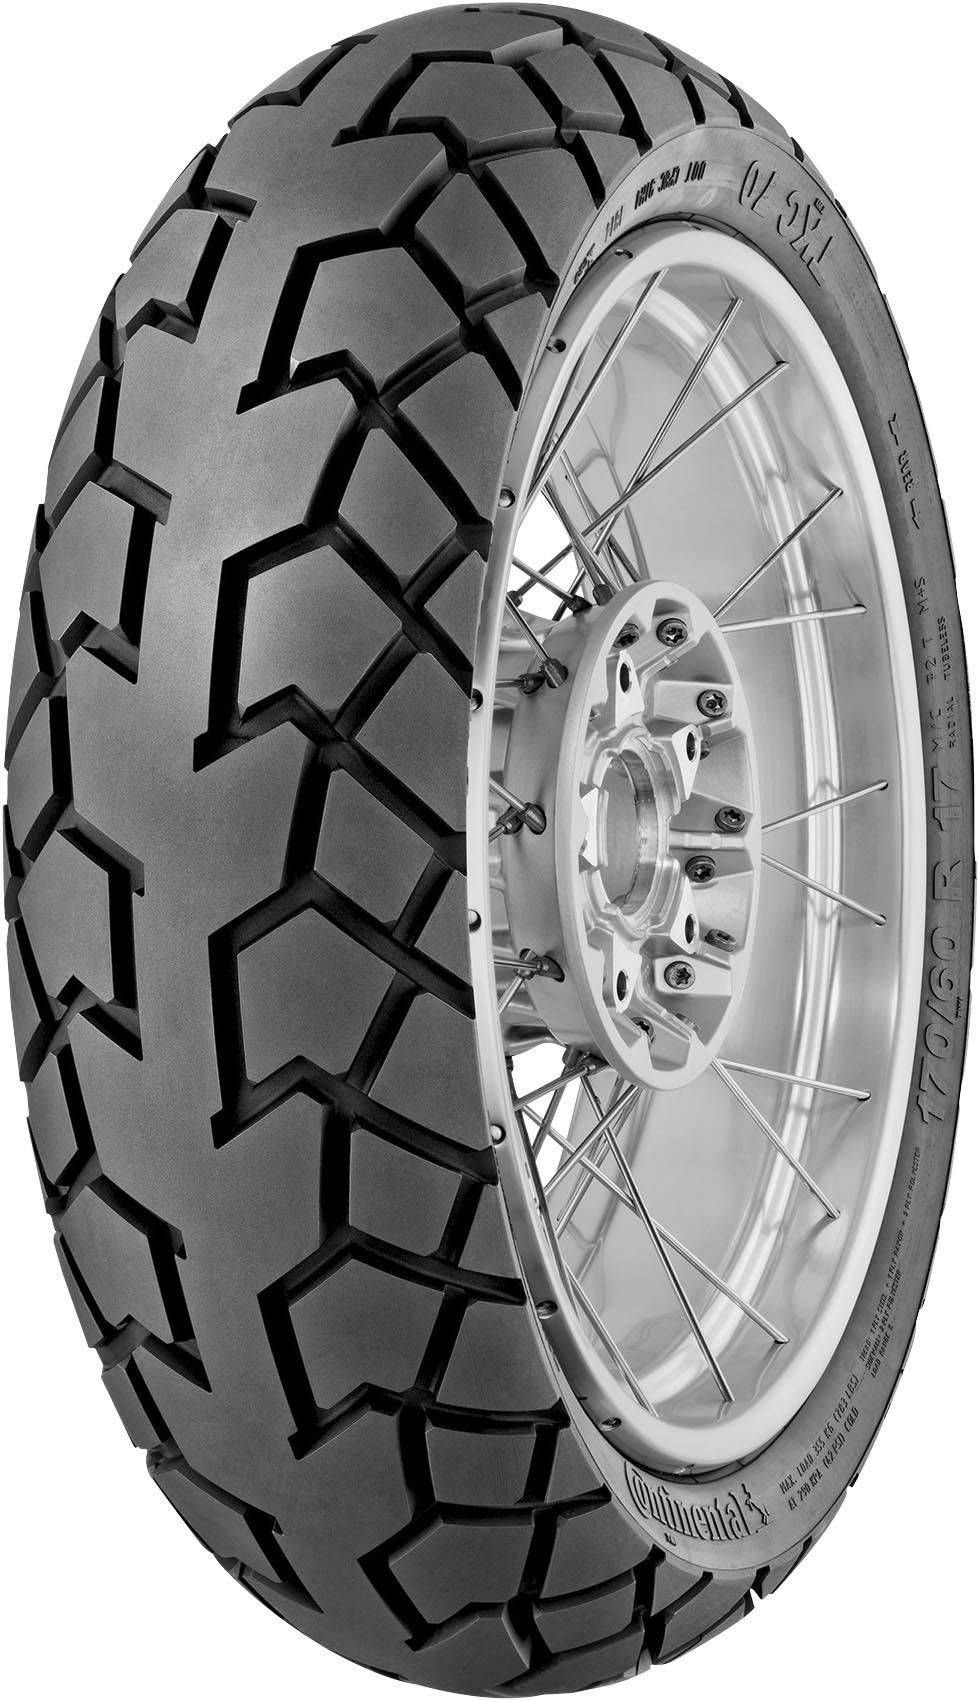 product_type-moto_tires CONTINENTAL TKC70R 170/60 R17 72S